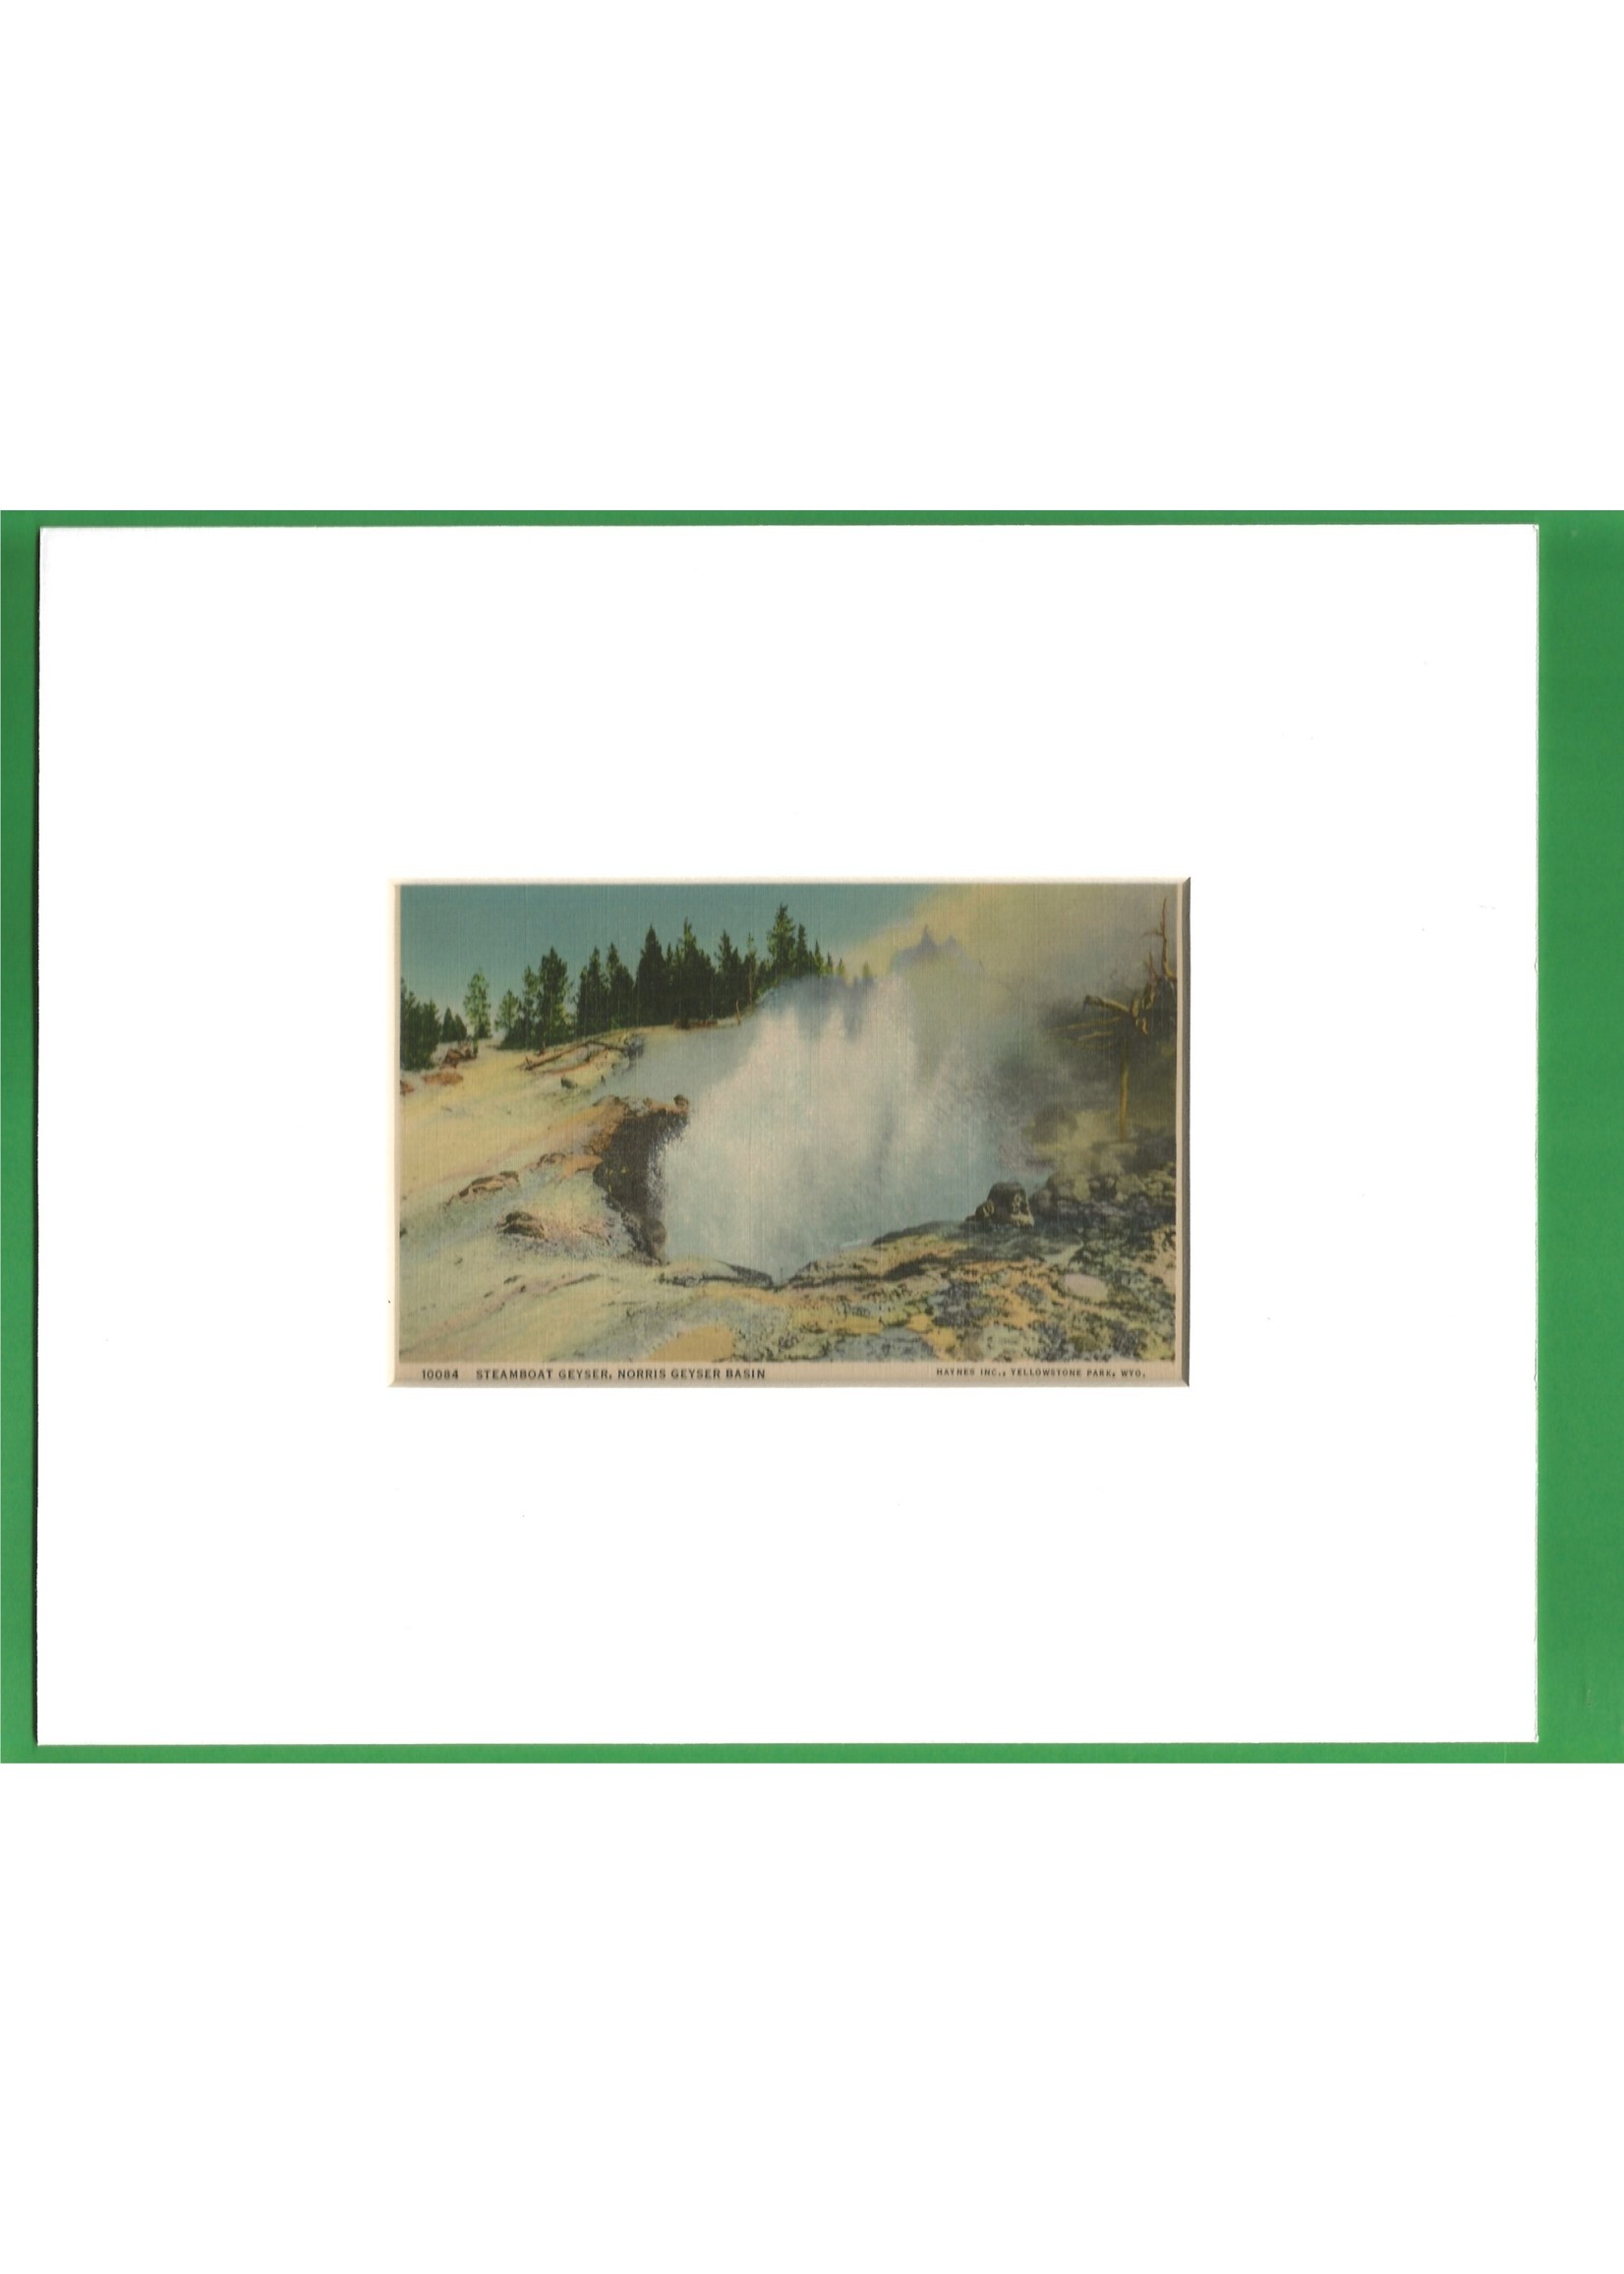 Mirage & Lineco YNP 150th Steamboat Geyser 10084 Mat